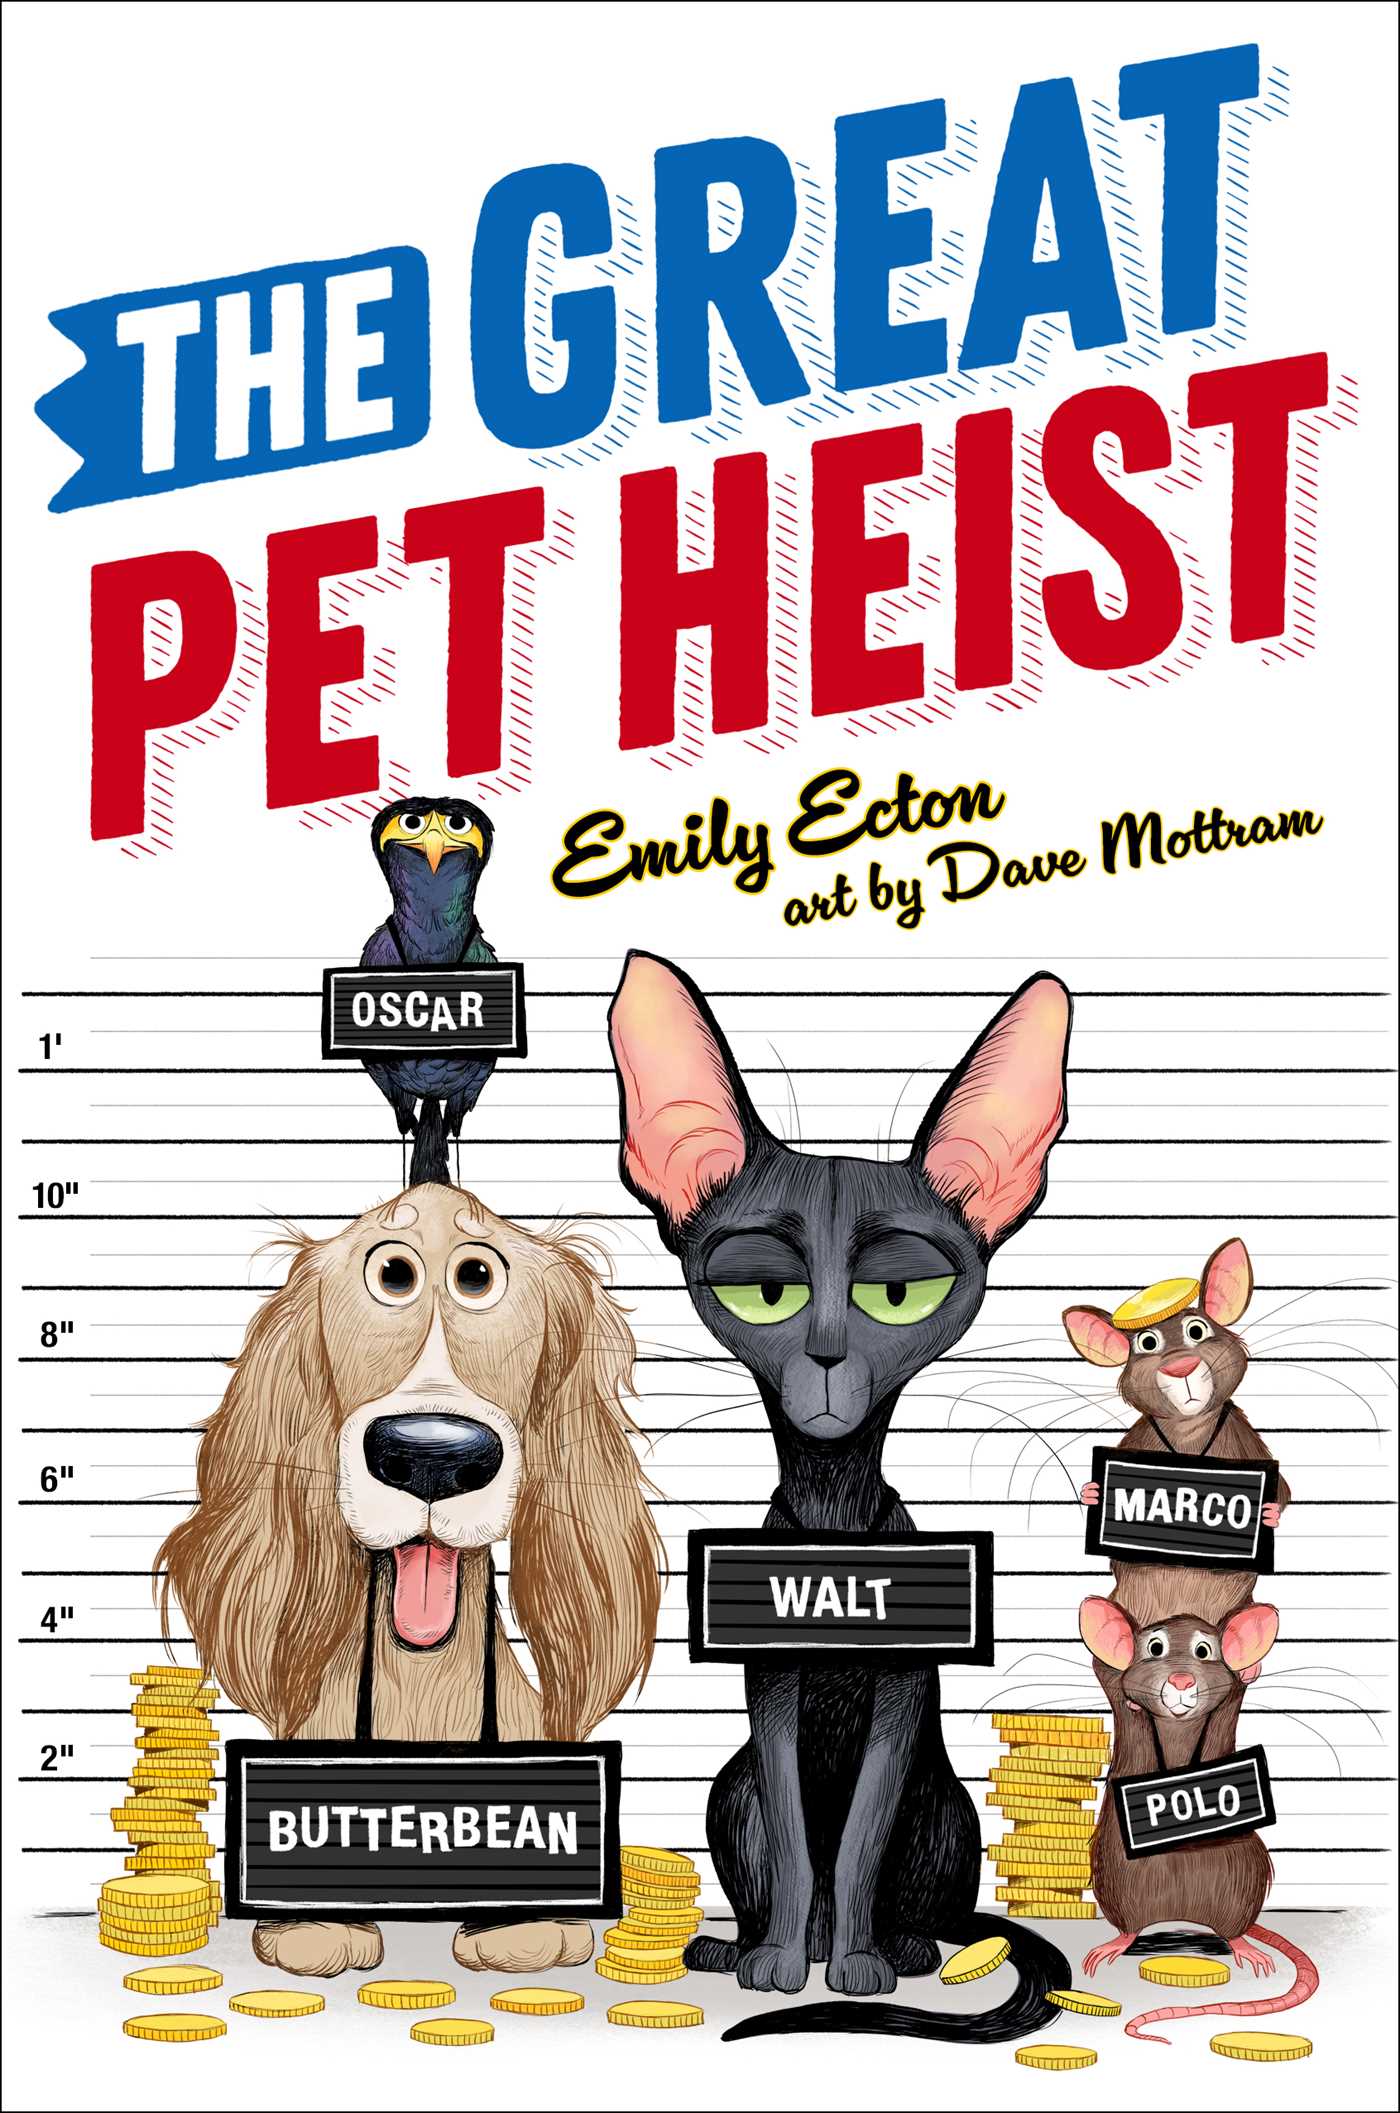 The Great Pet Heist book cover